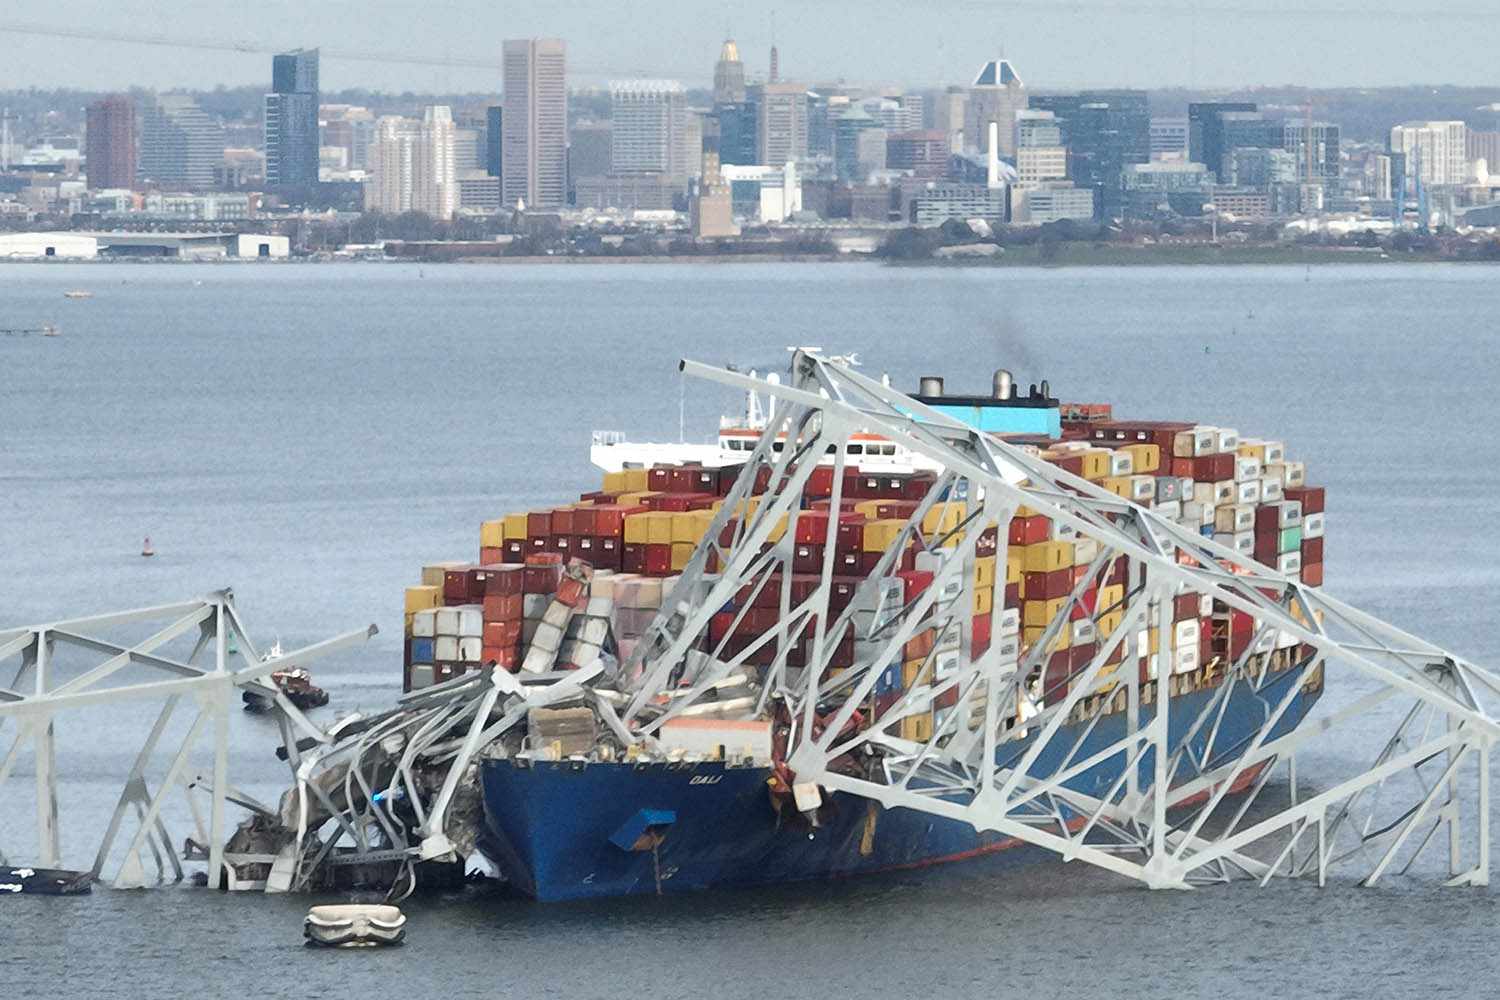 Sixth and Final Body Recovered from Baltimore Key Bridge Collapse Site